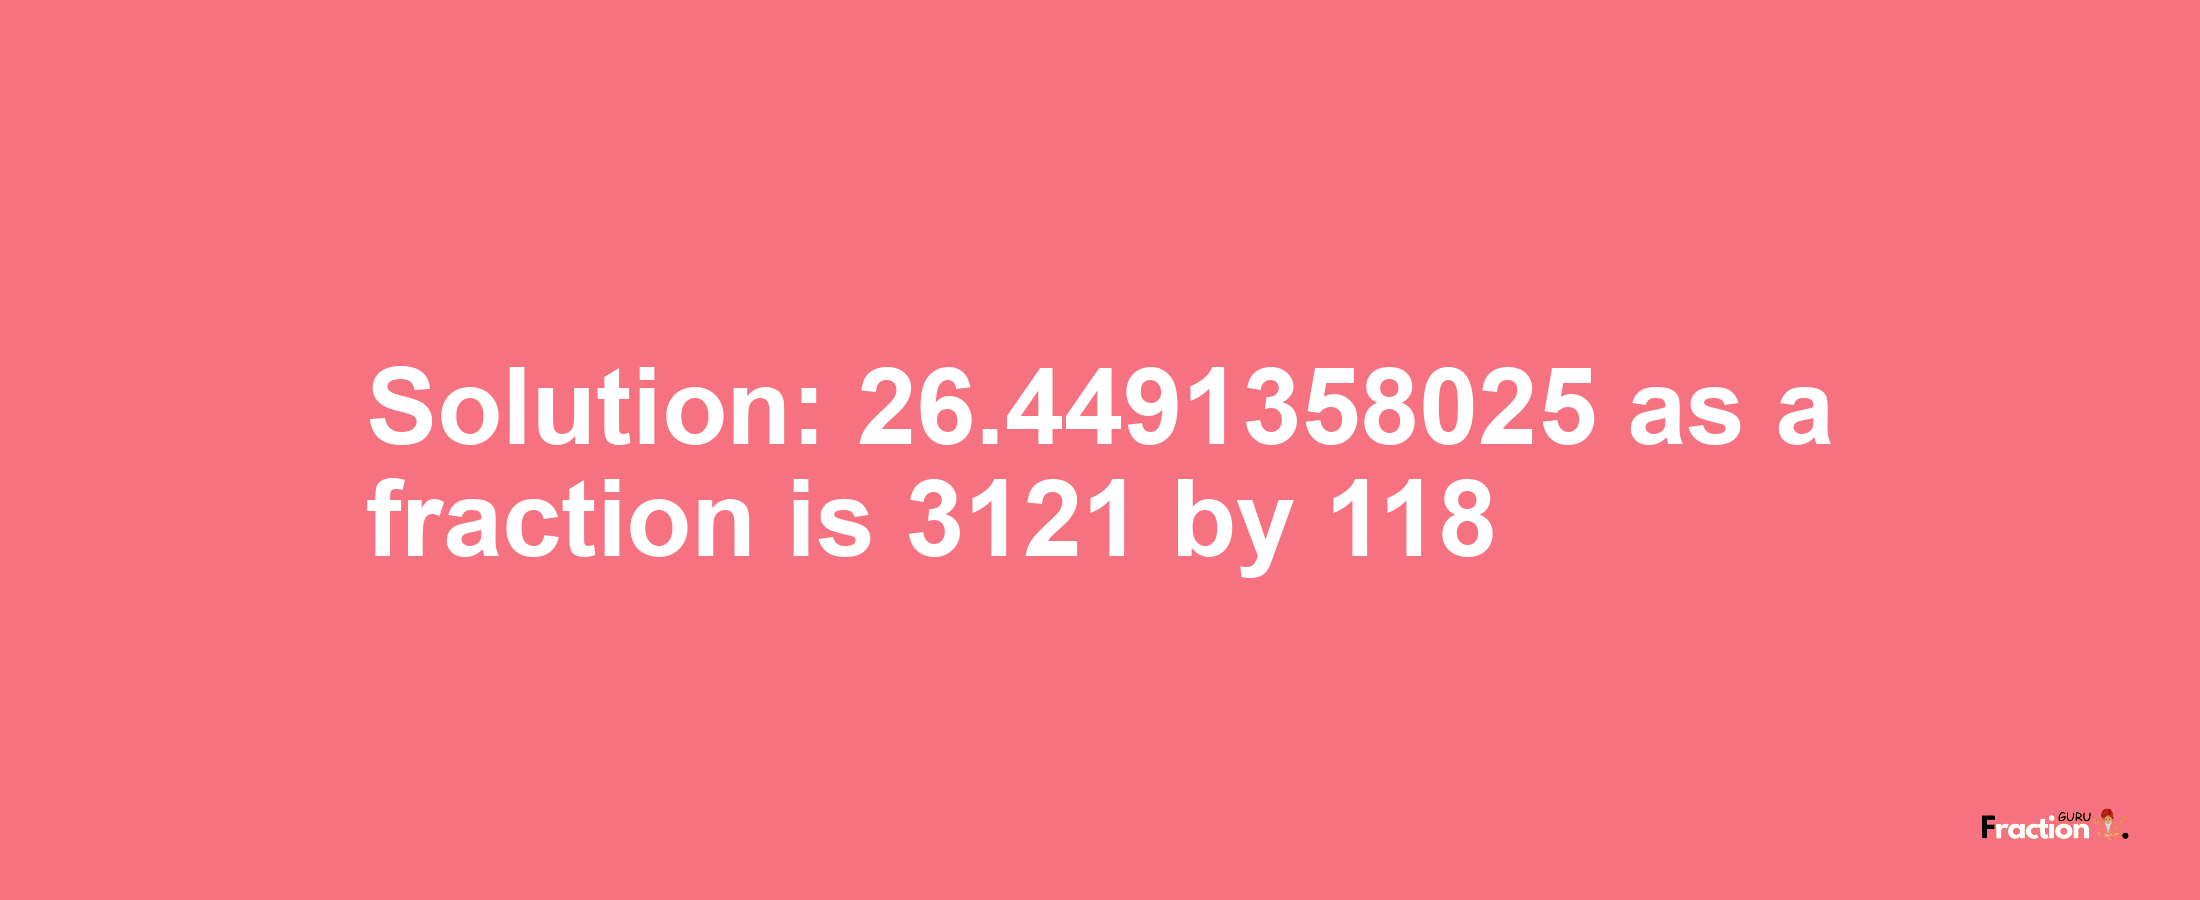 Solution:26.4491358025 as a fraction is 3121/118